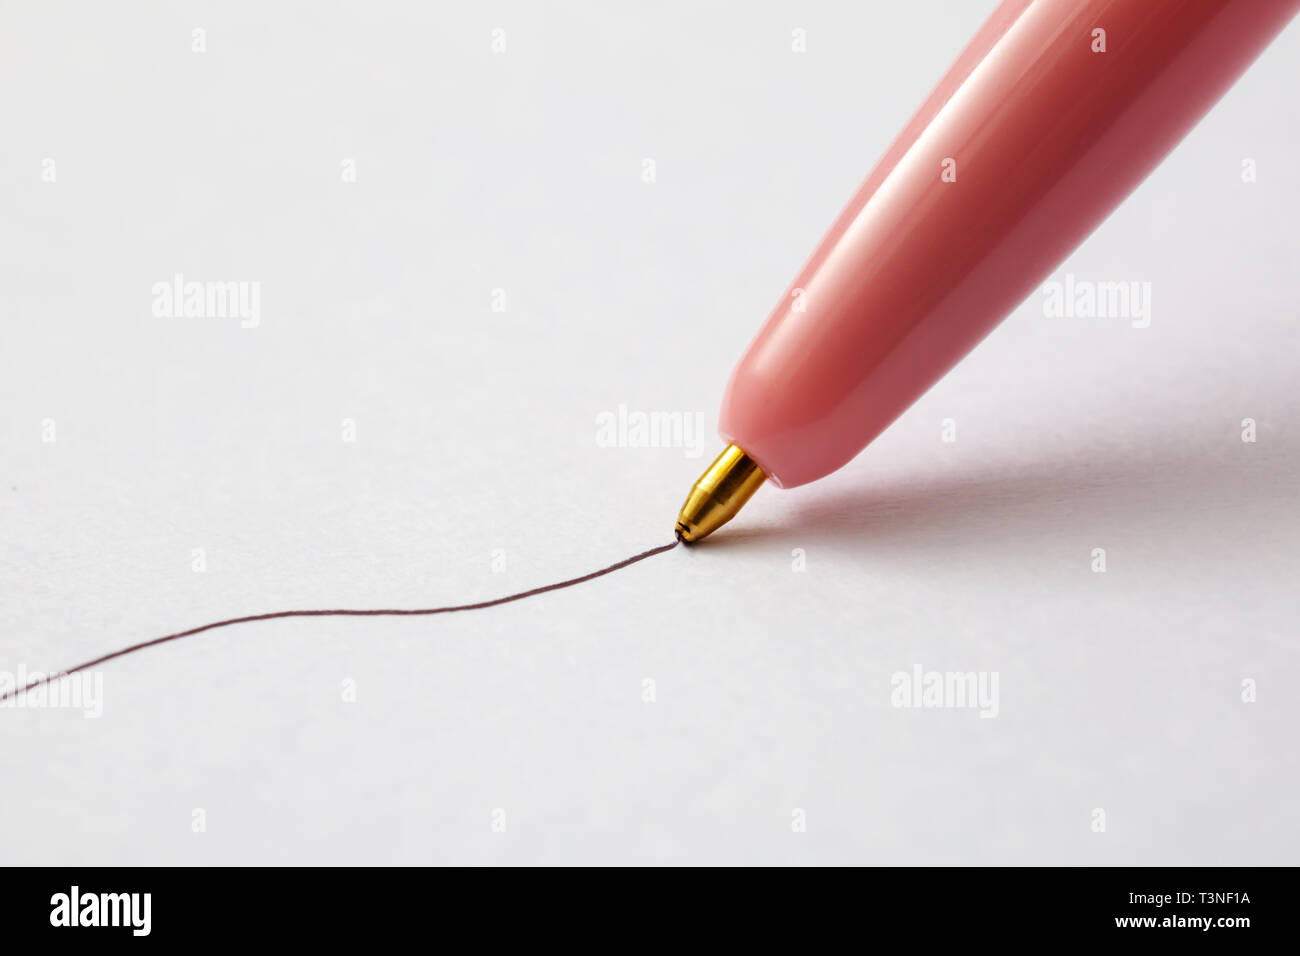 A closeup view of a pink ball point pen drawing an ink line on a textured paper surface. Stock Photo